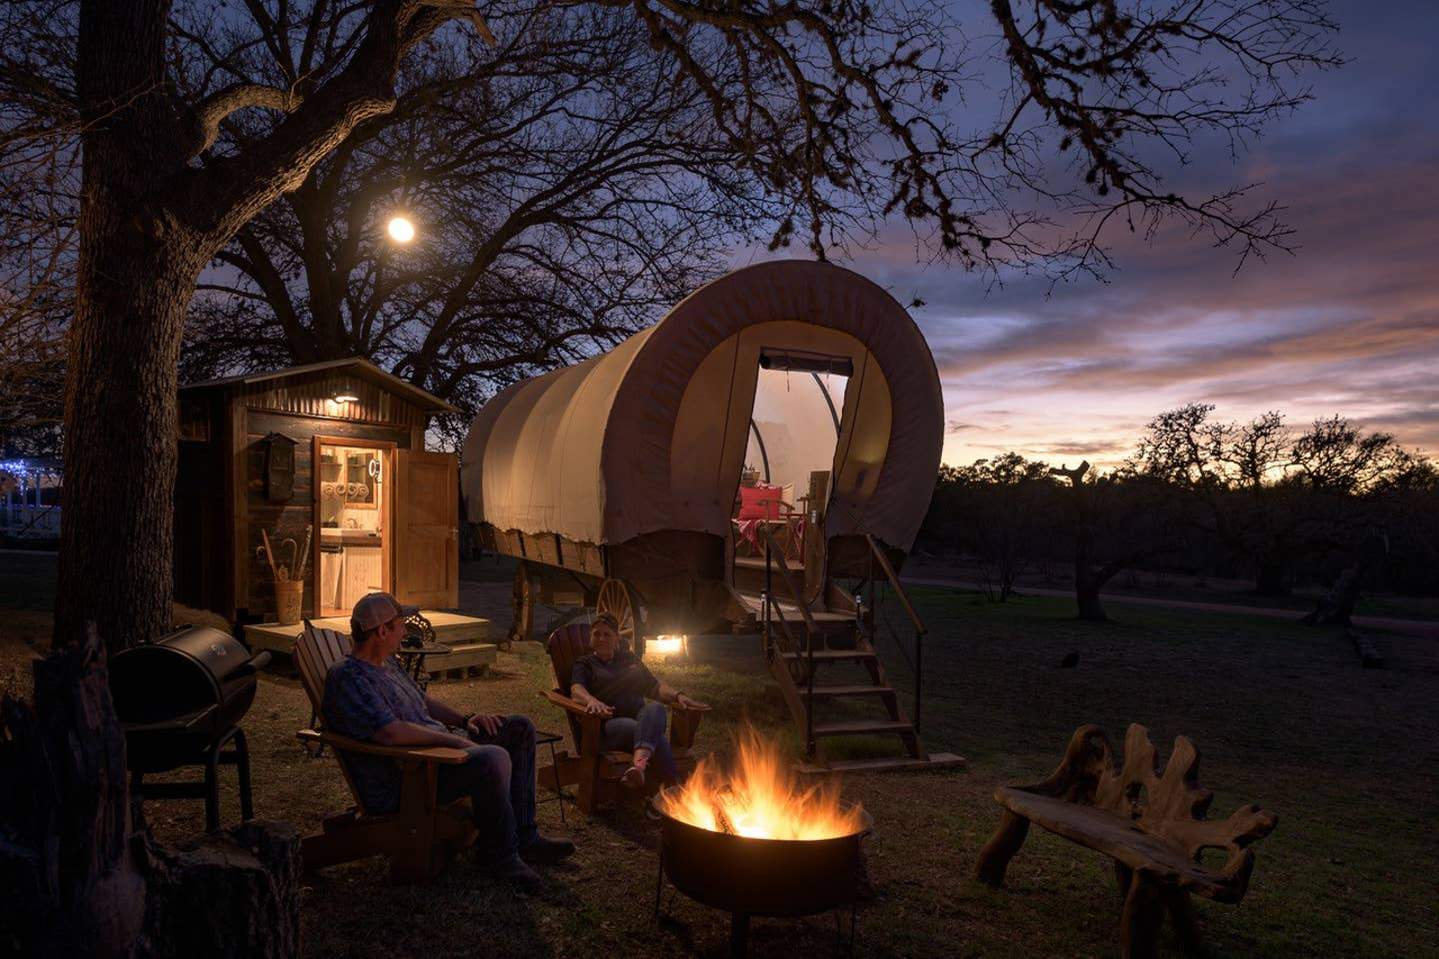 13 of the quirkiest Airbnb listings you can rent in Texas